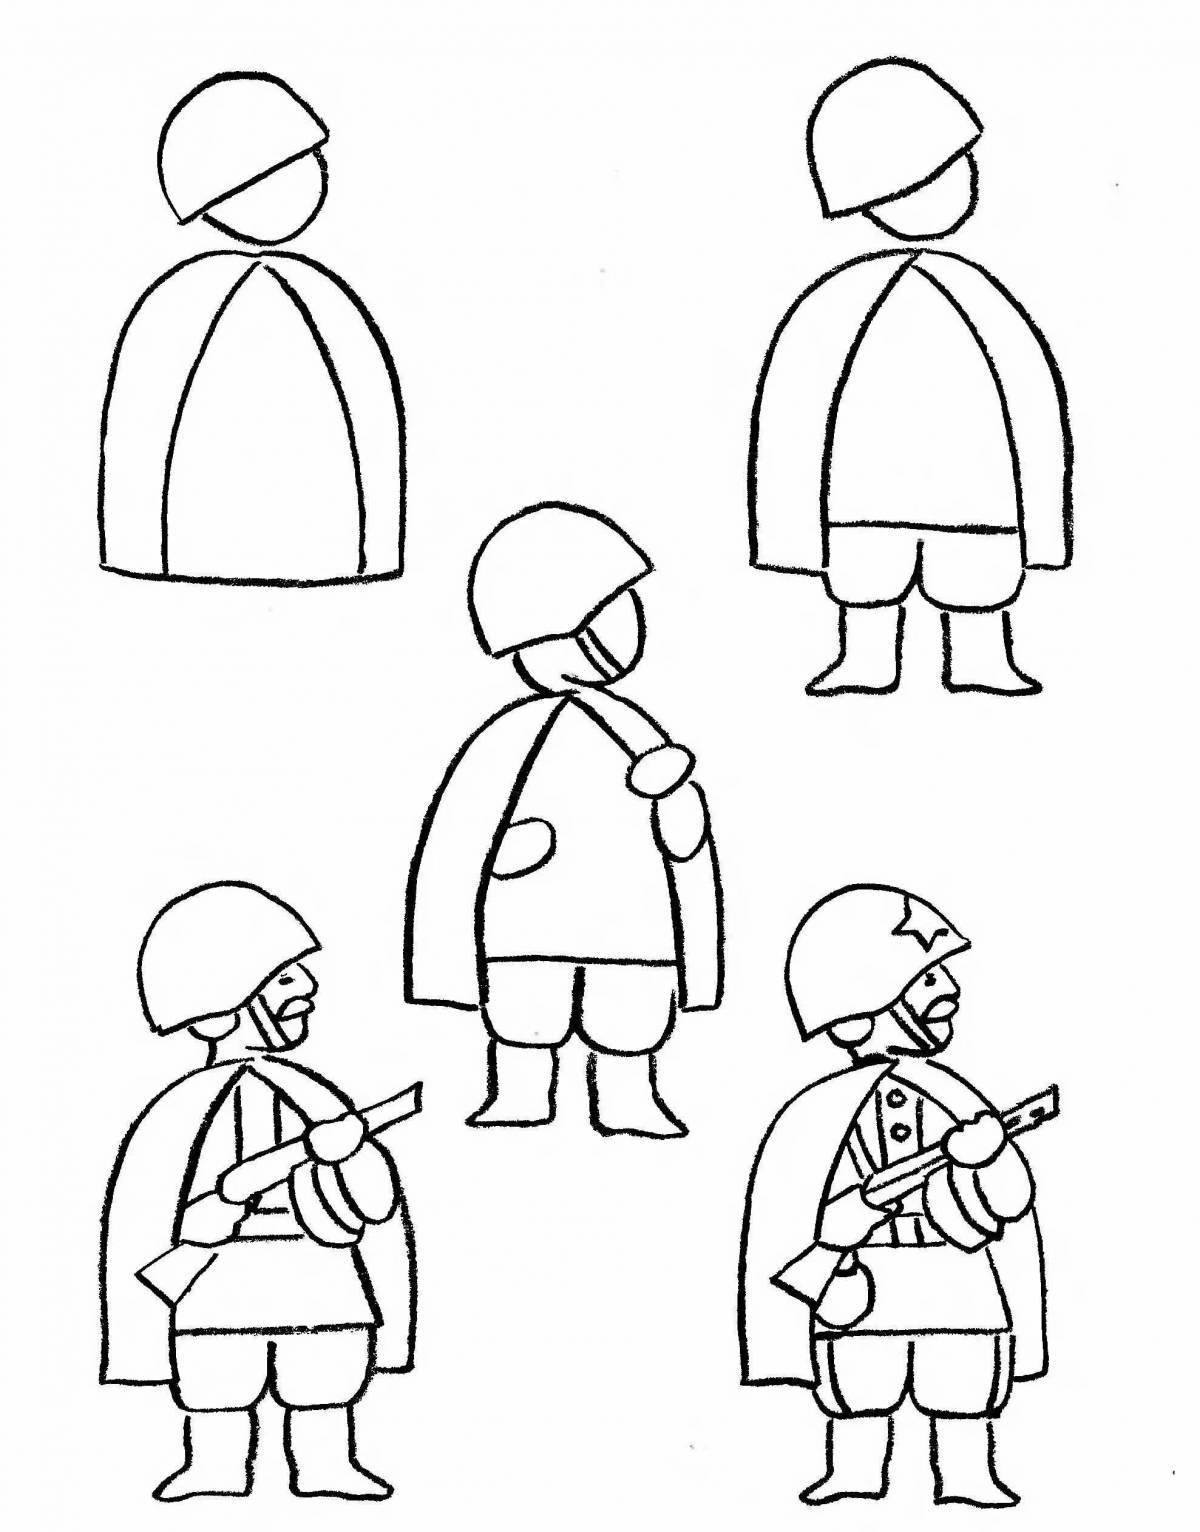 Jolly soldier and child's drawing